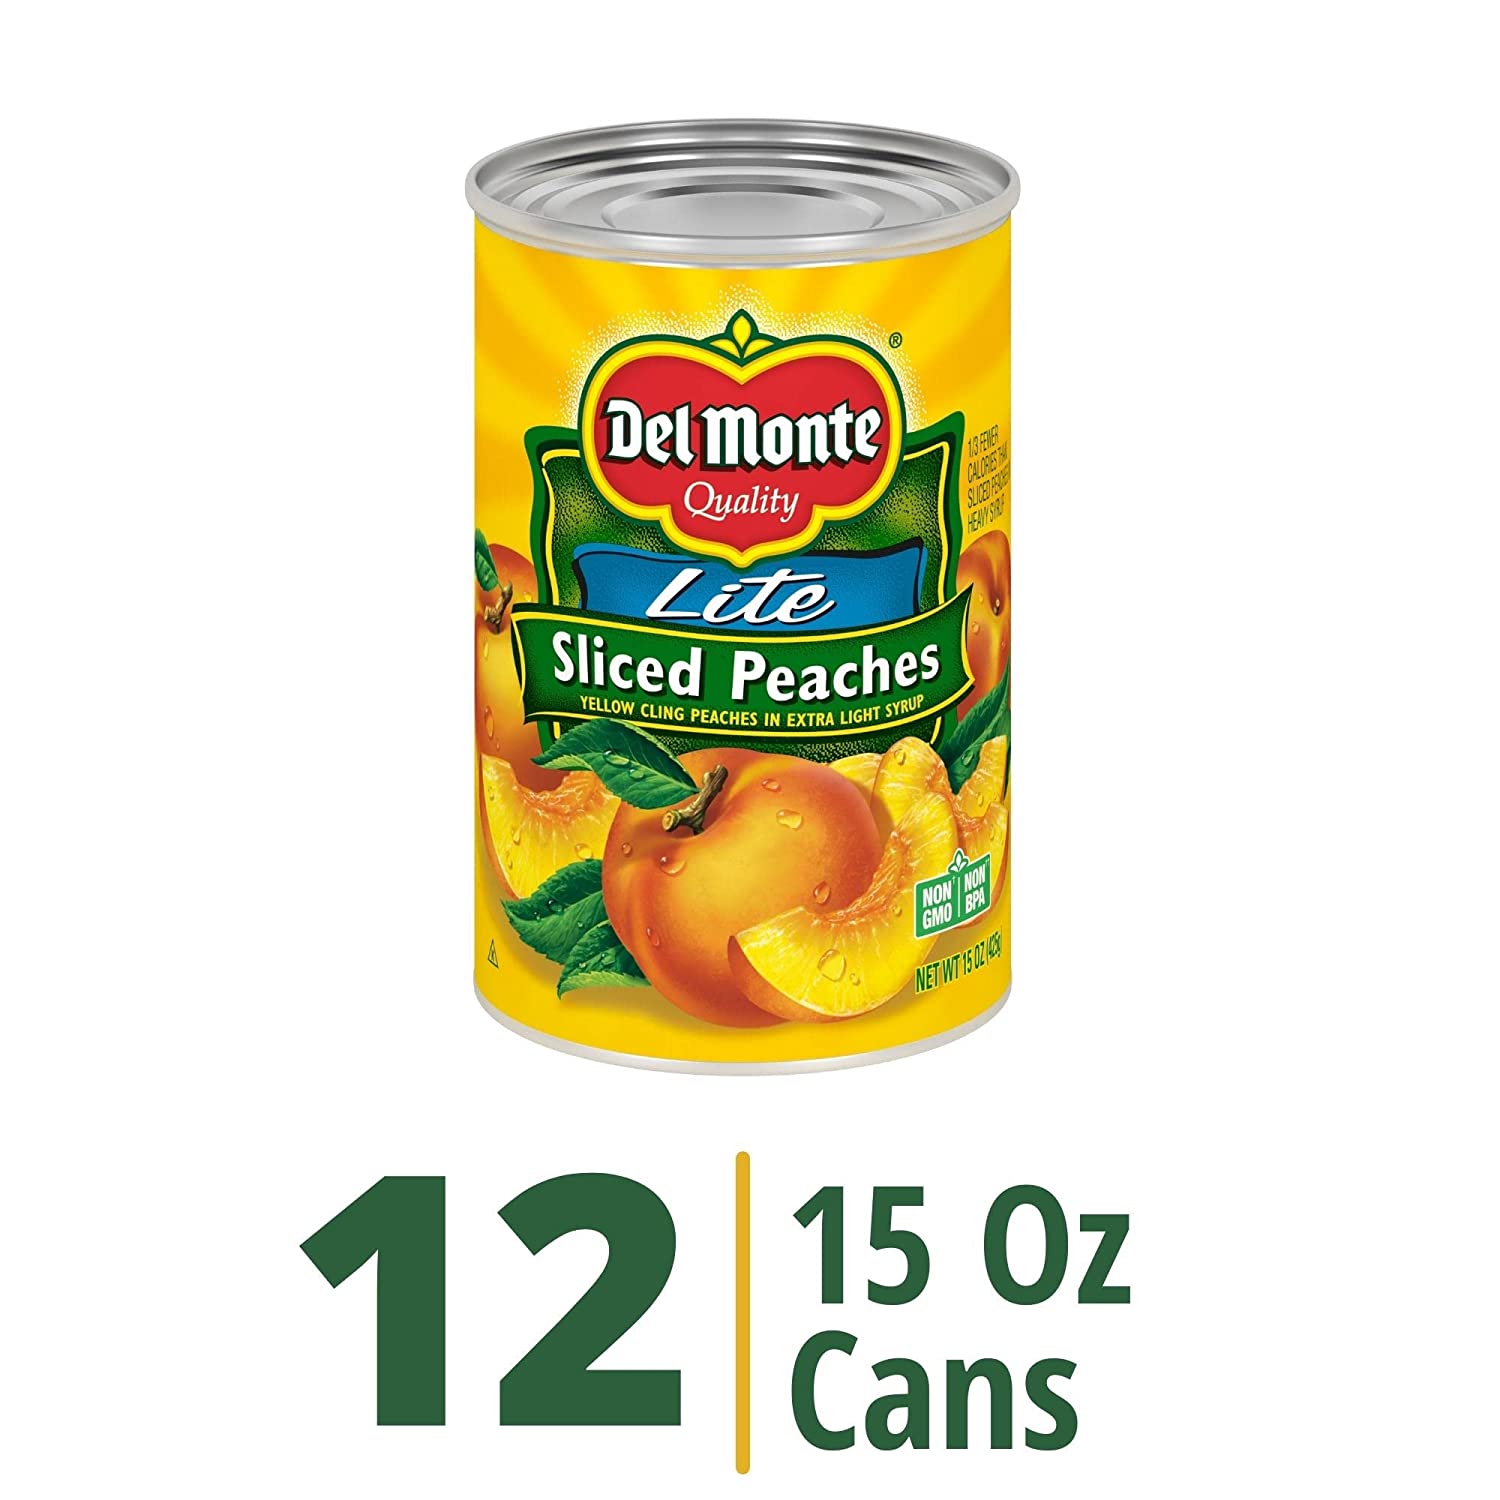 Sliced Yellow Peaches in Extra Light Syrup, 15 Ounce (Pack of 12)   less than $1.00 / can  whoo $11.68